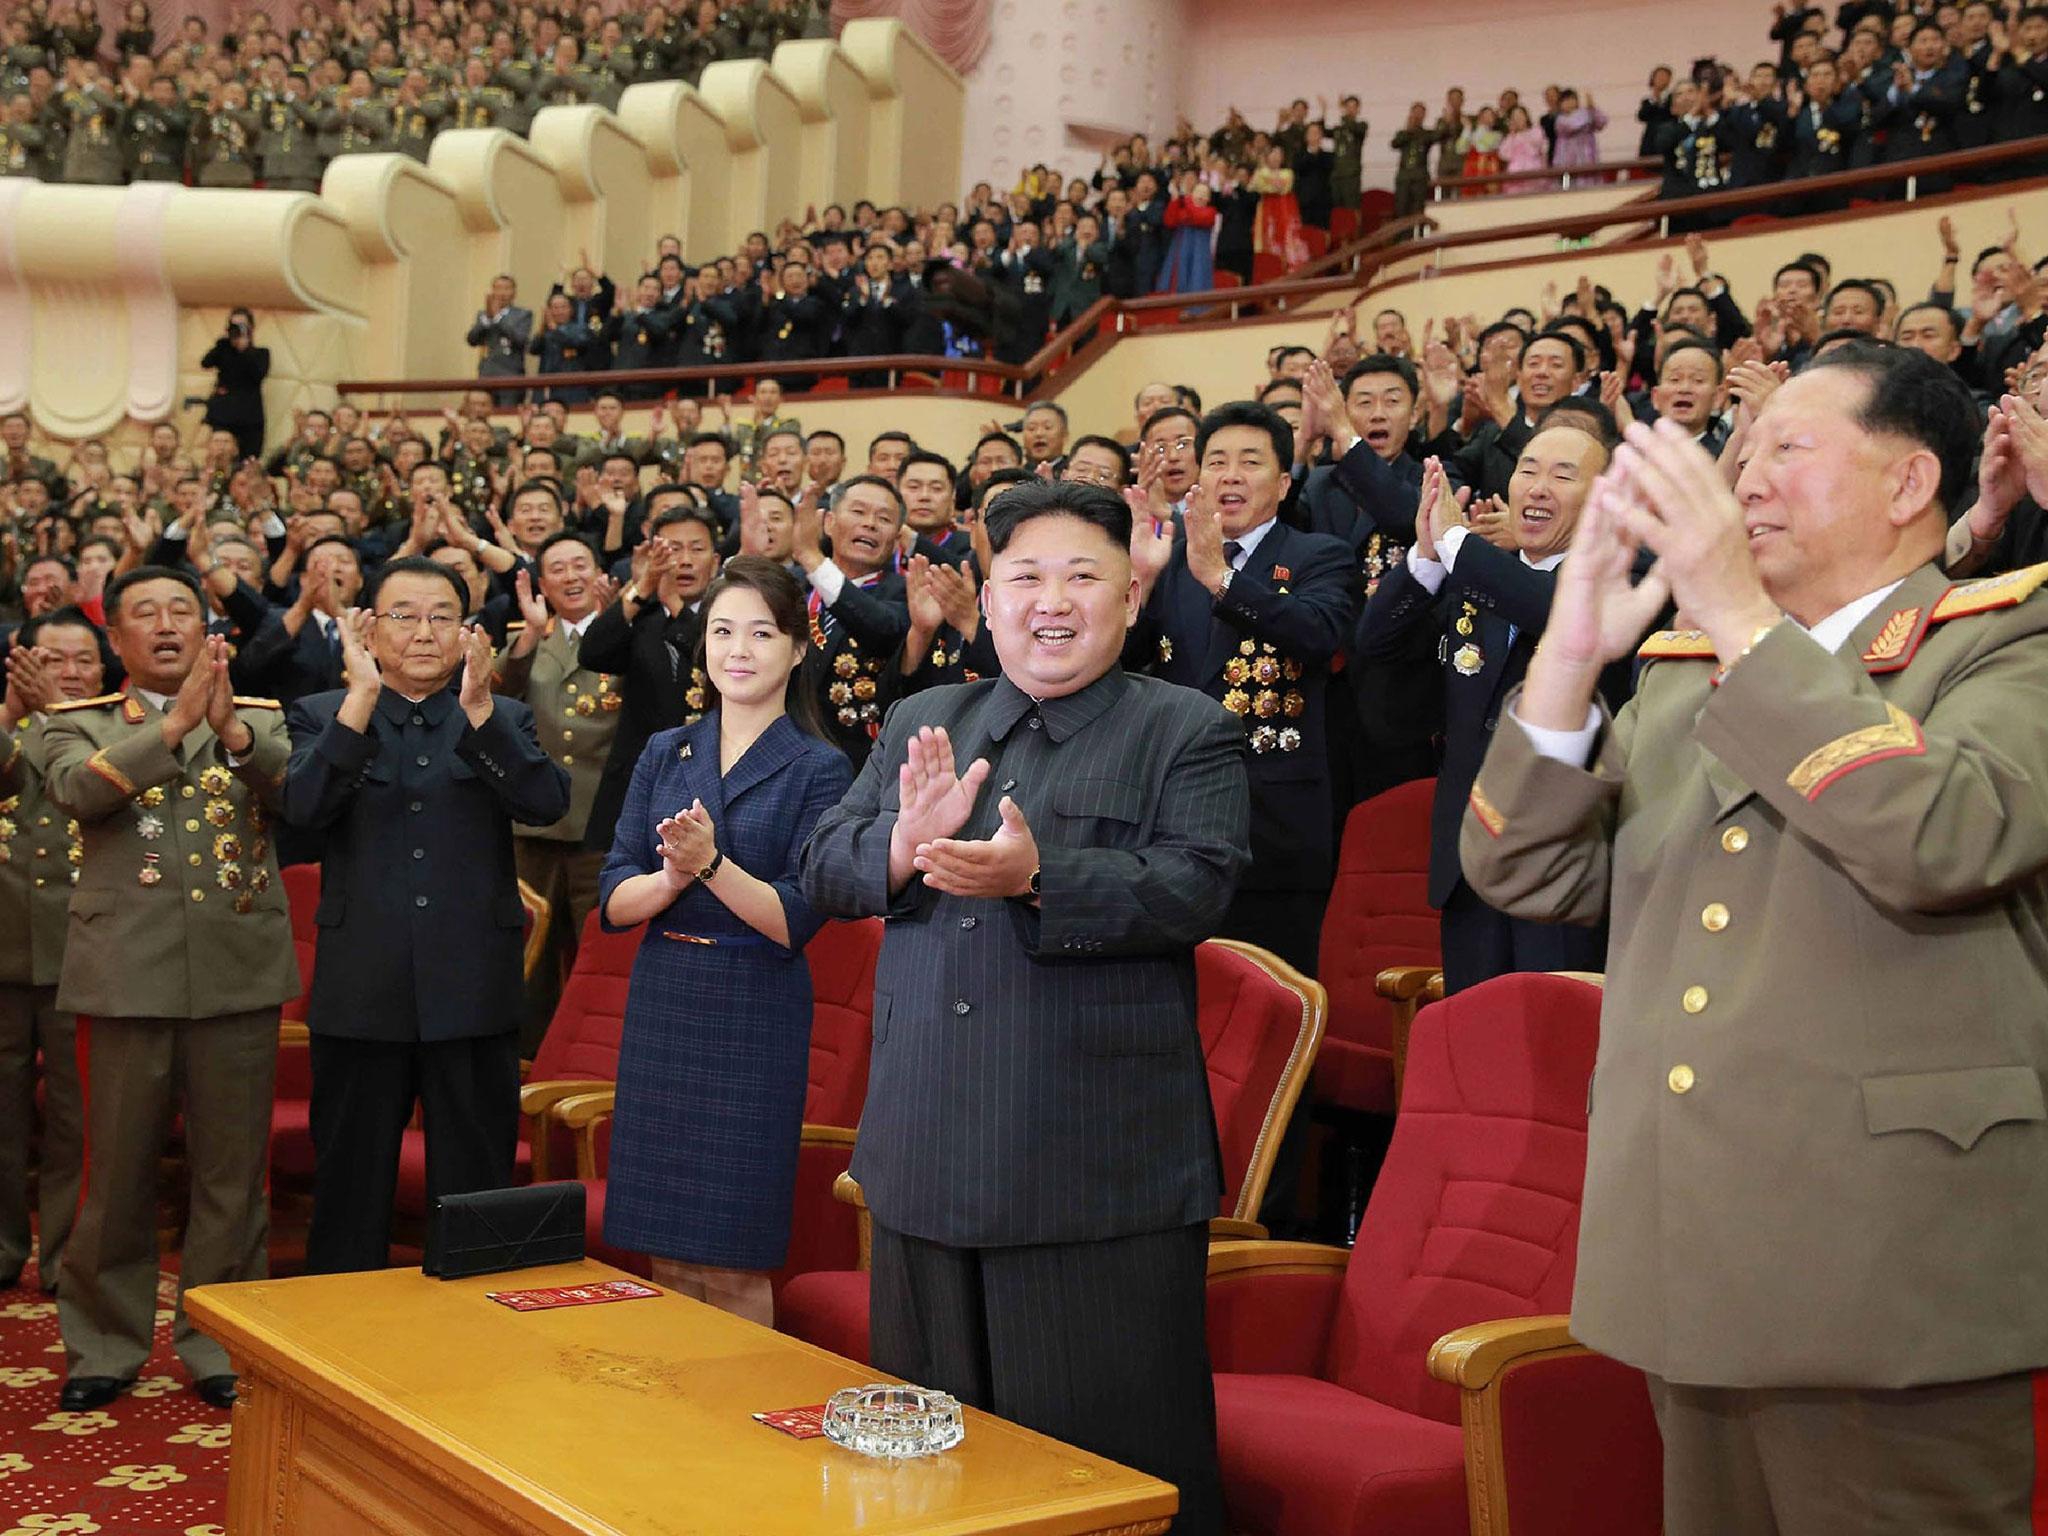 Kim Jong-un launched another nuclear test this week